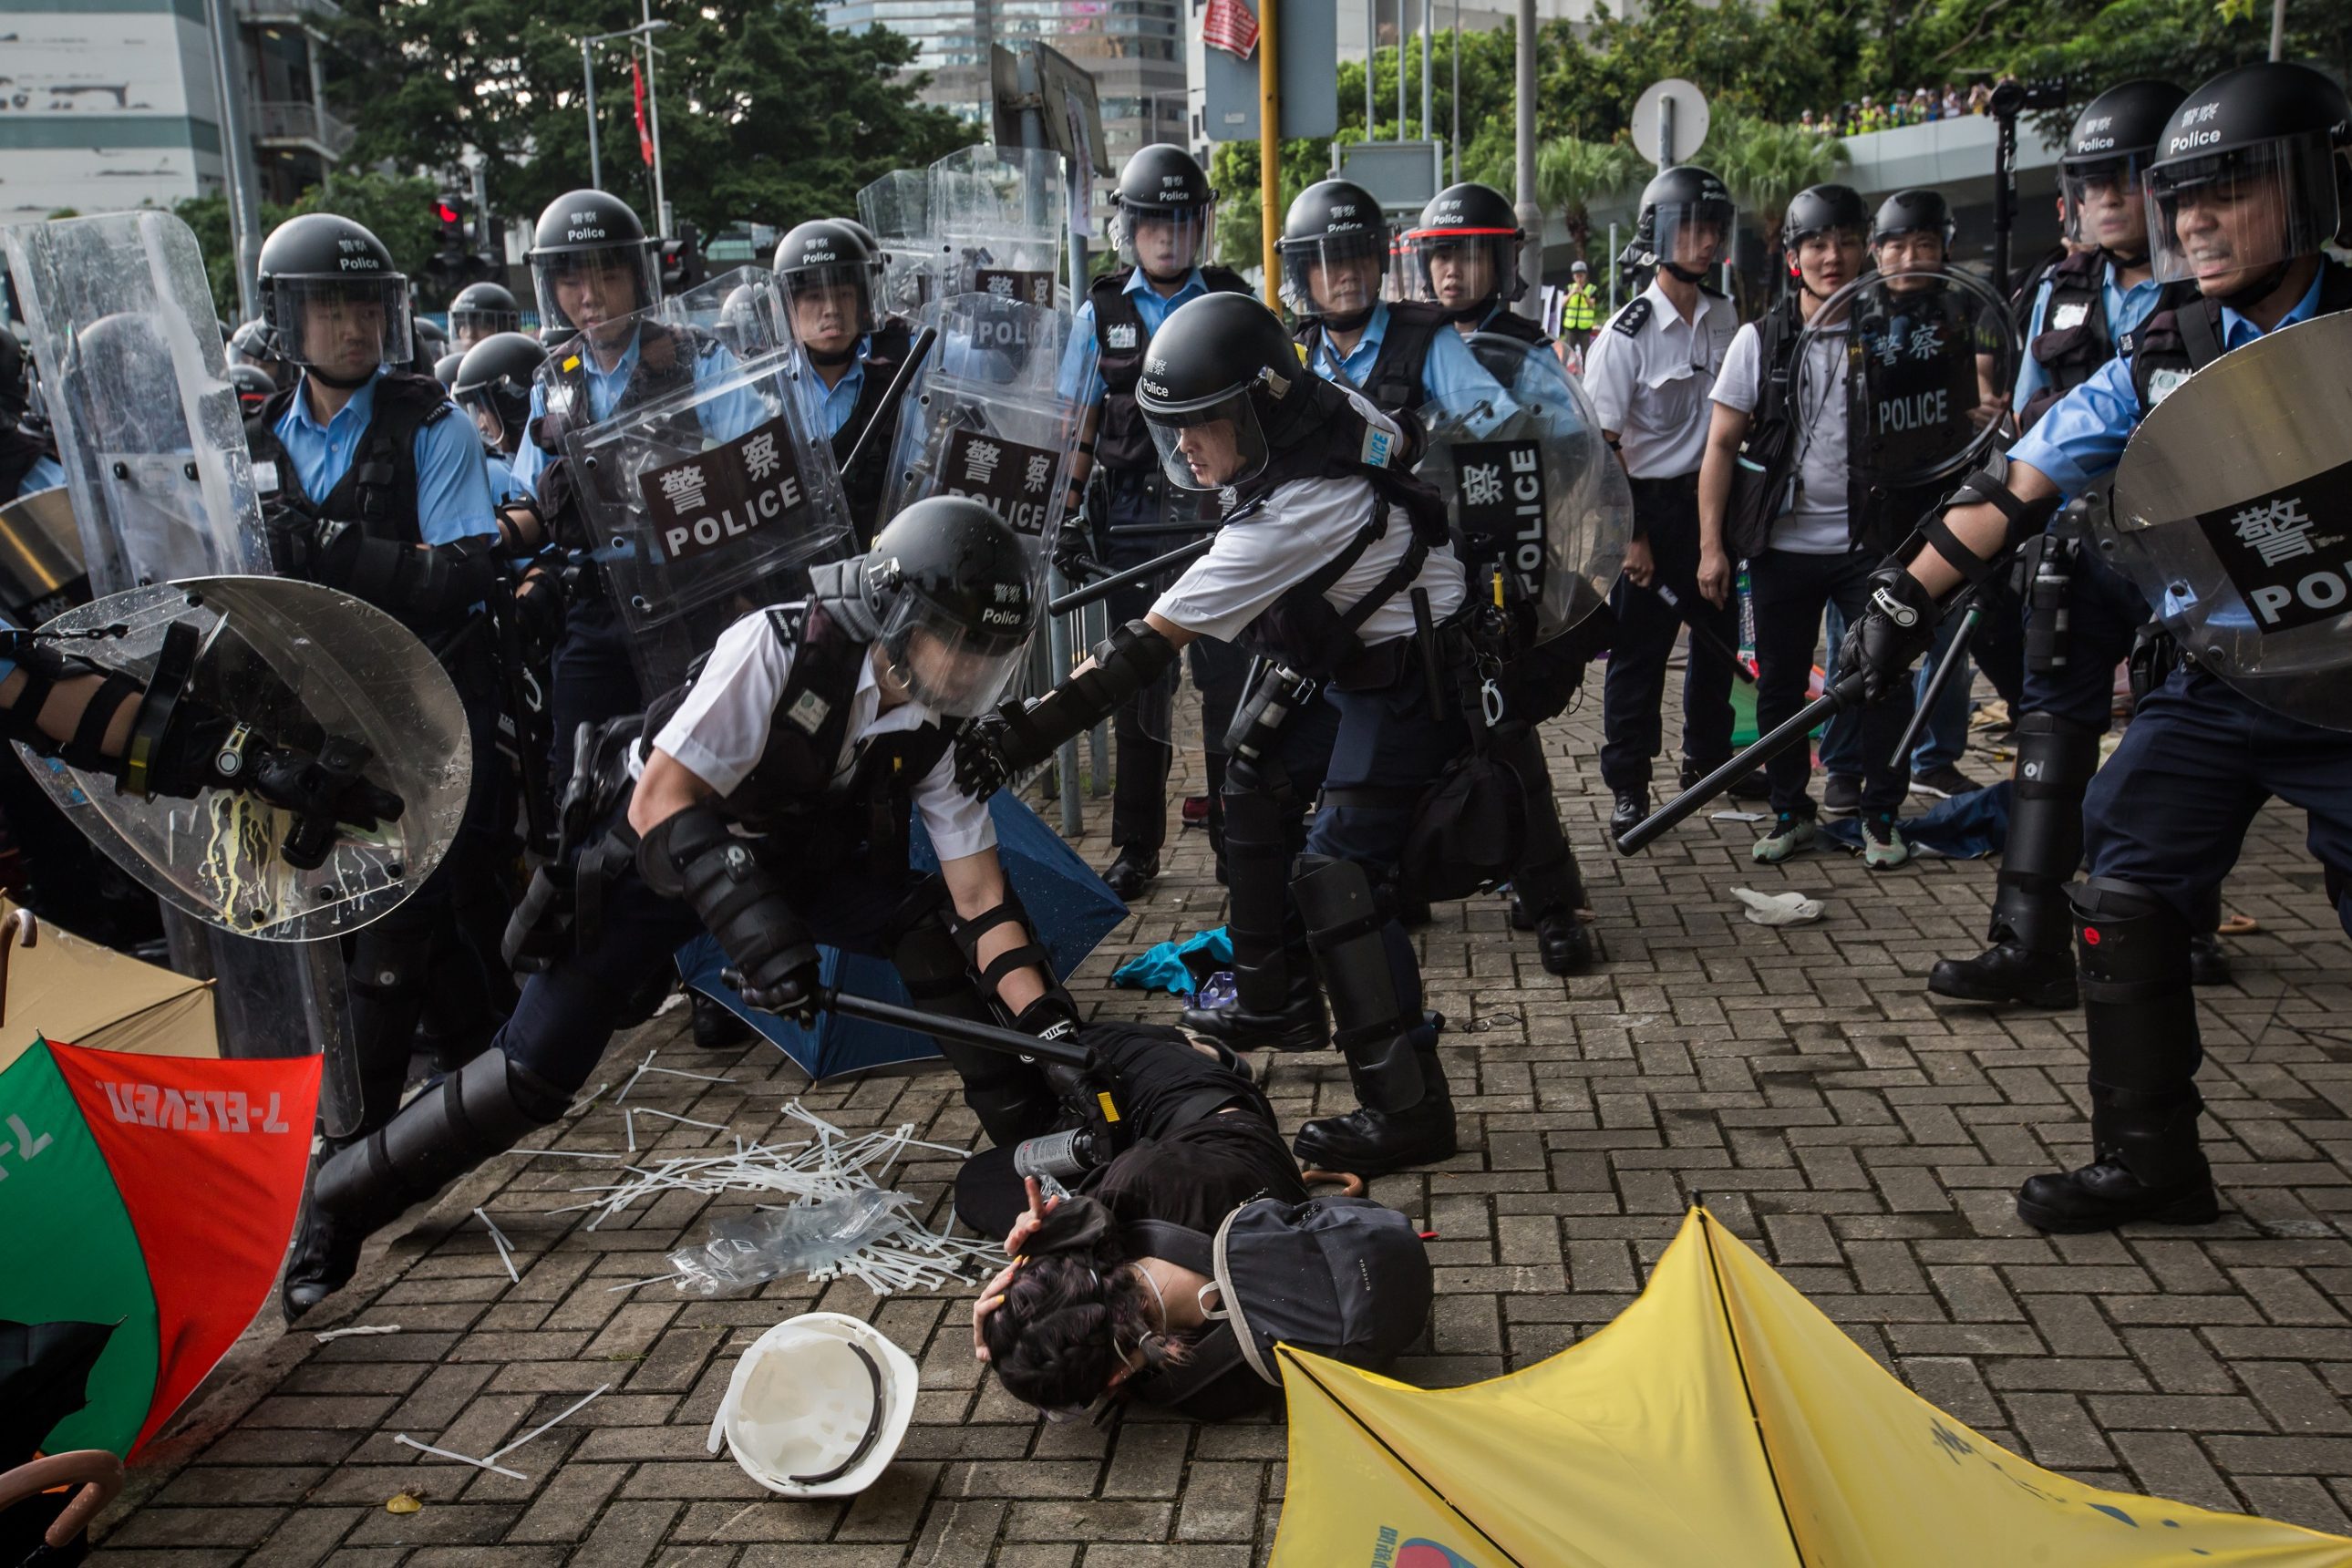 Clashes between police and protesters